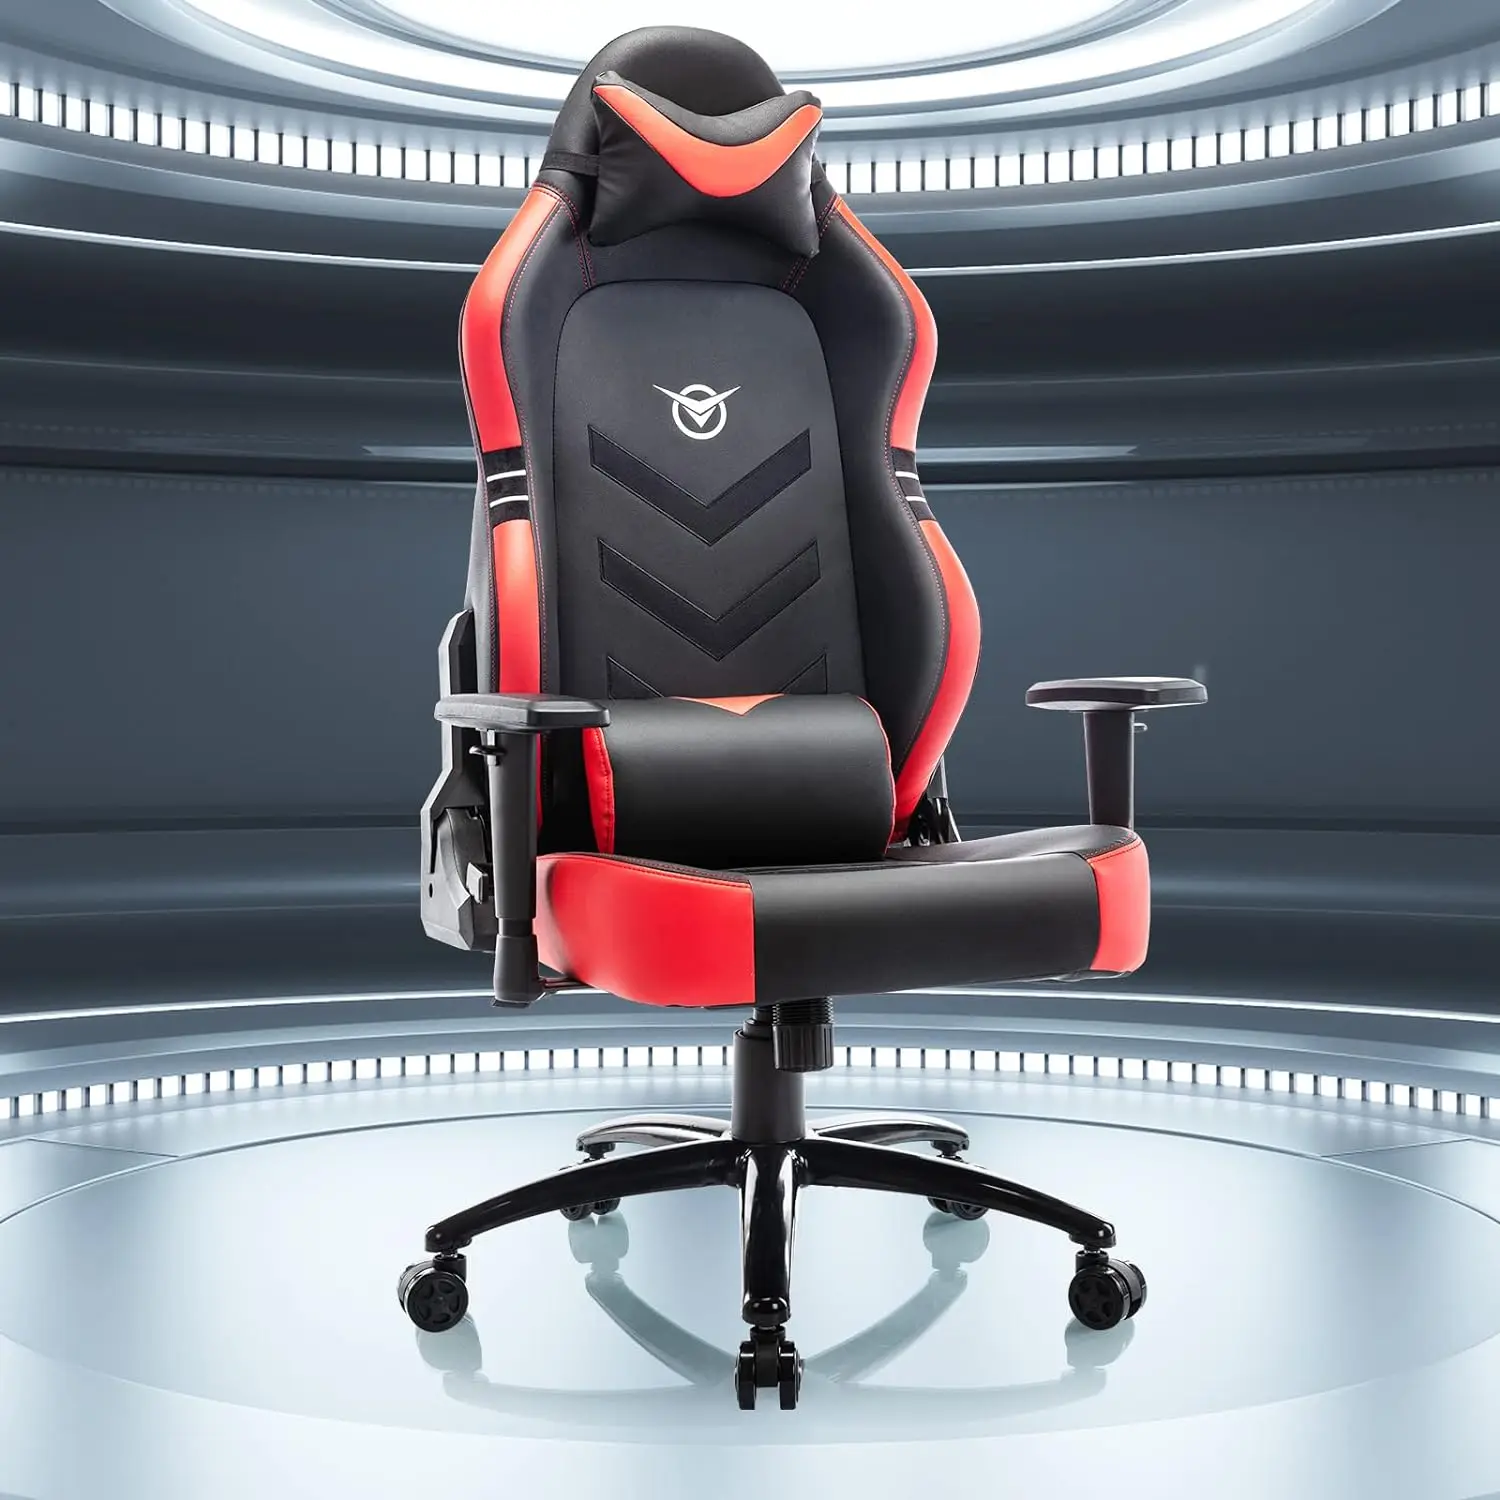 

Big and Tall Gaming Chair 350lbs-Racing Computer Gamer Chair,Ergonomic Desk Office PC Chair with Wide Seat, Reclining Back,